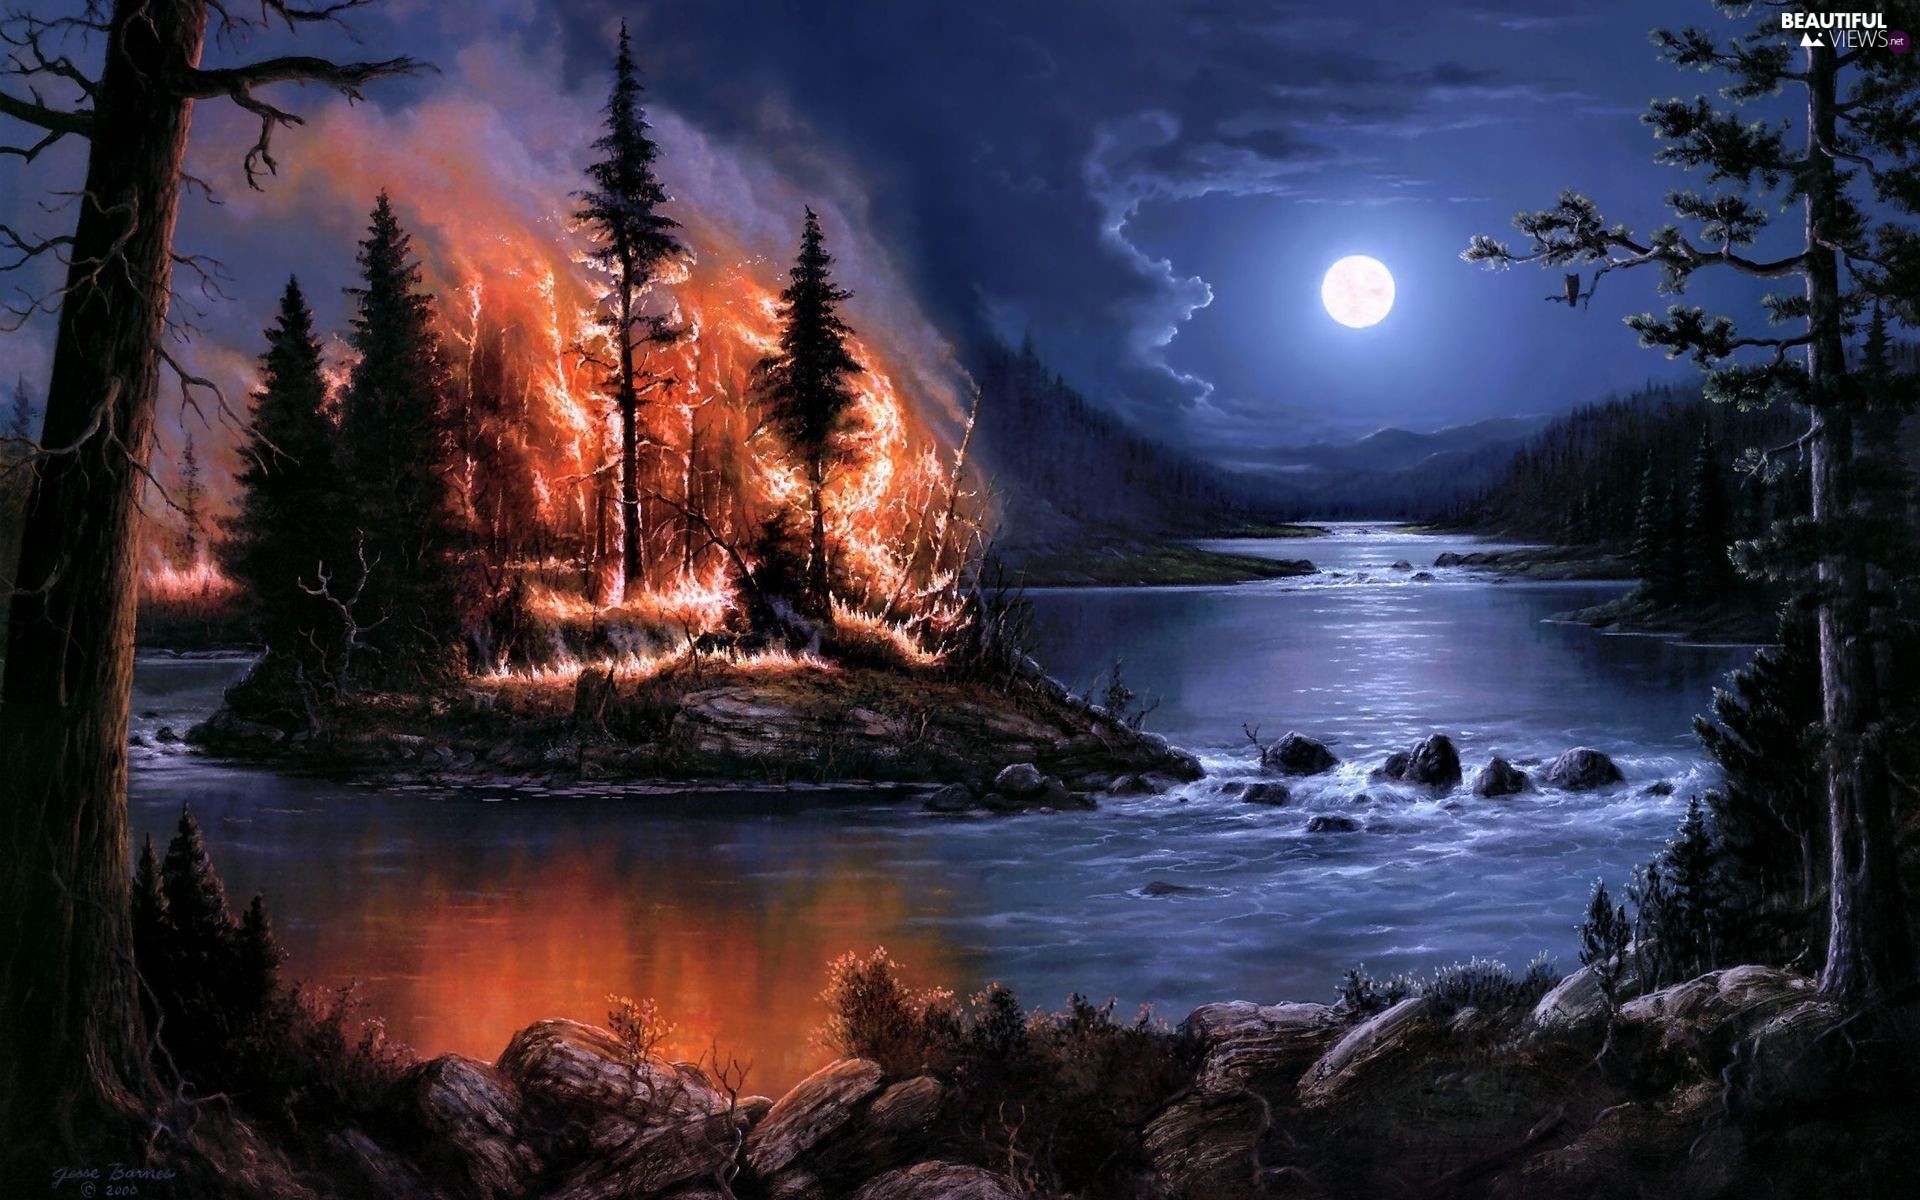 1920x1200 Jesse barnes, landscape, river, waterfall, forest fires in the forest |  Sunrsie in the forest | Pinterest | Landscaping, Paintings and Prints